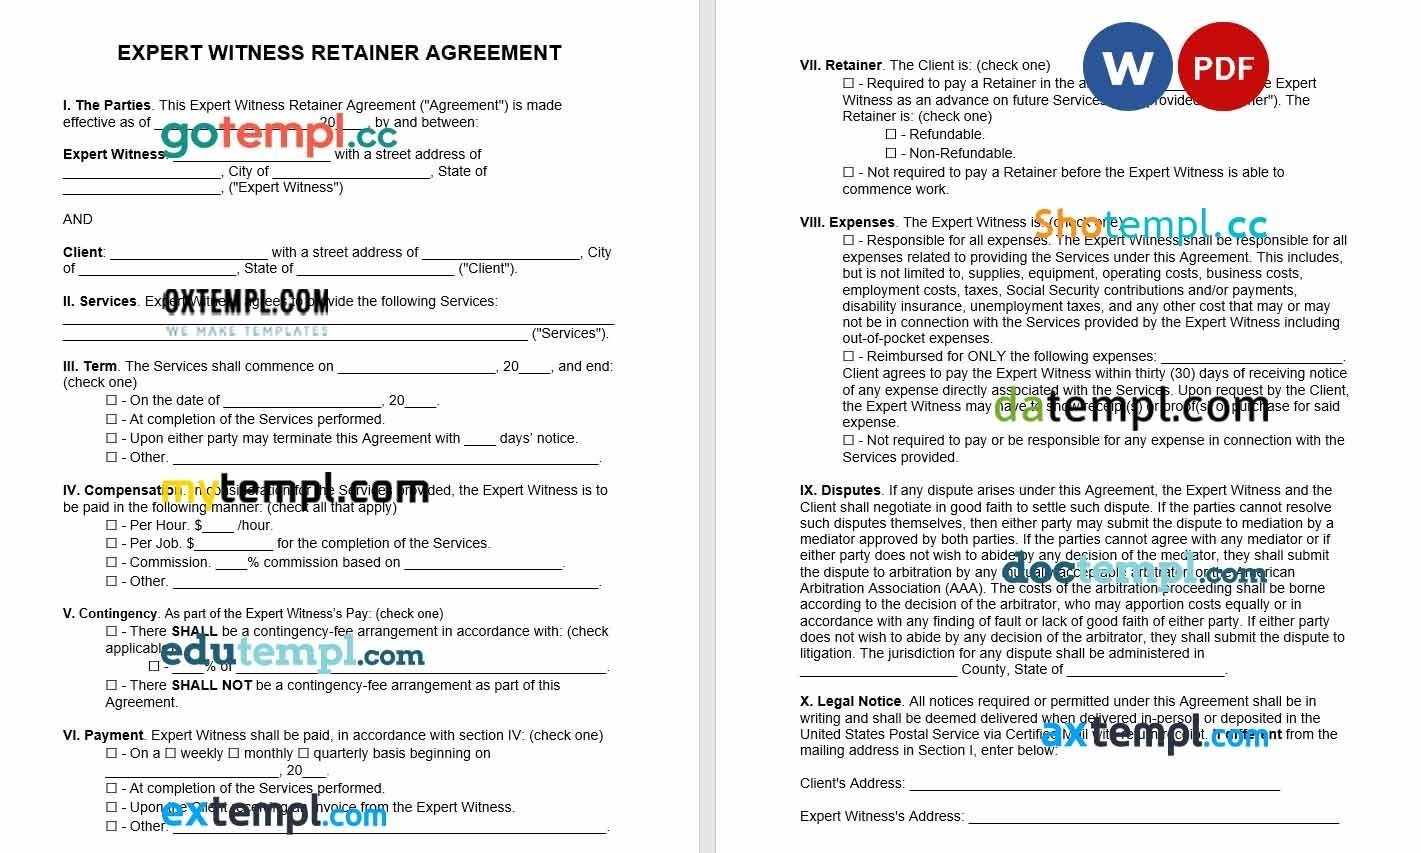 Expert Witness Retainer Agreement Word example, fully editable